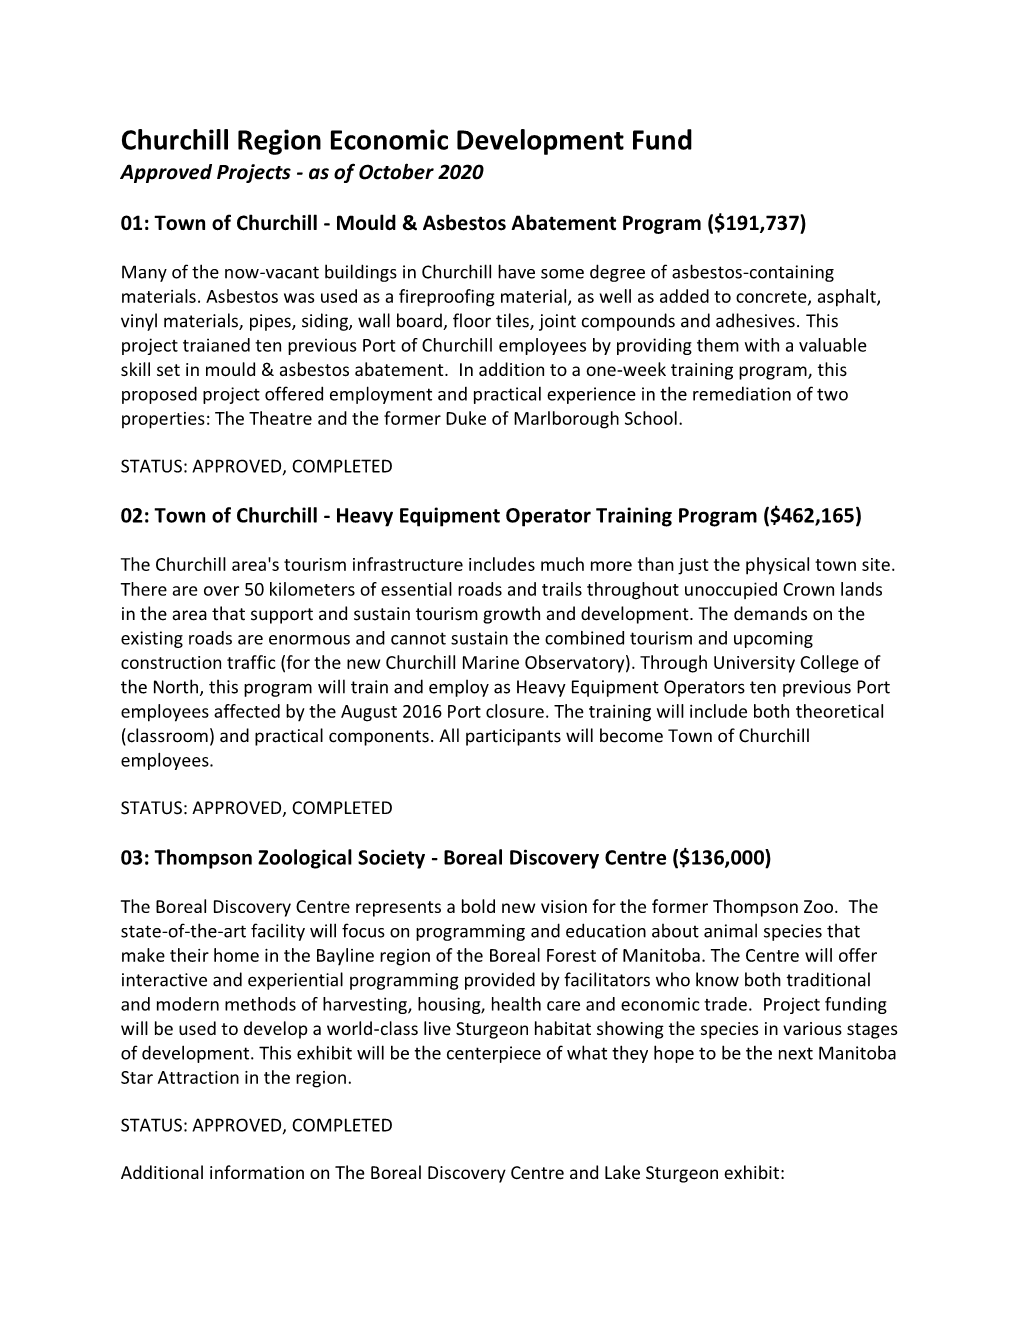 Churchill Region Economic Development Fund Approved Projects - As of October 2020